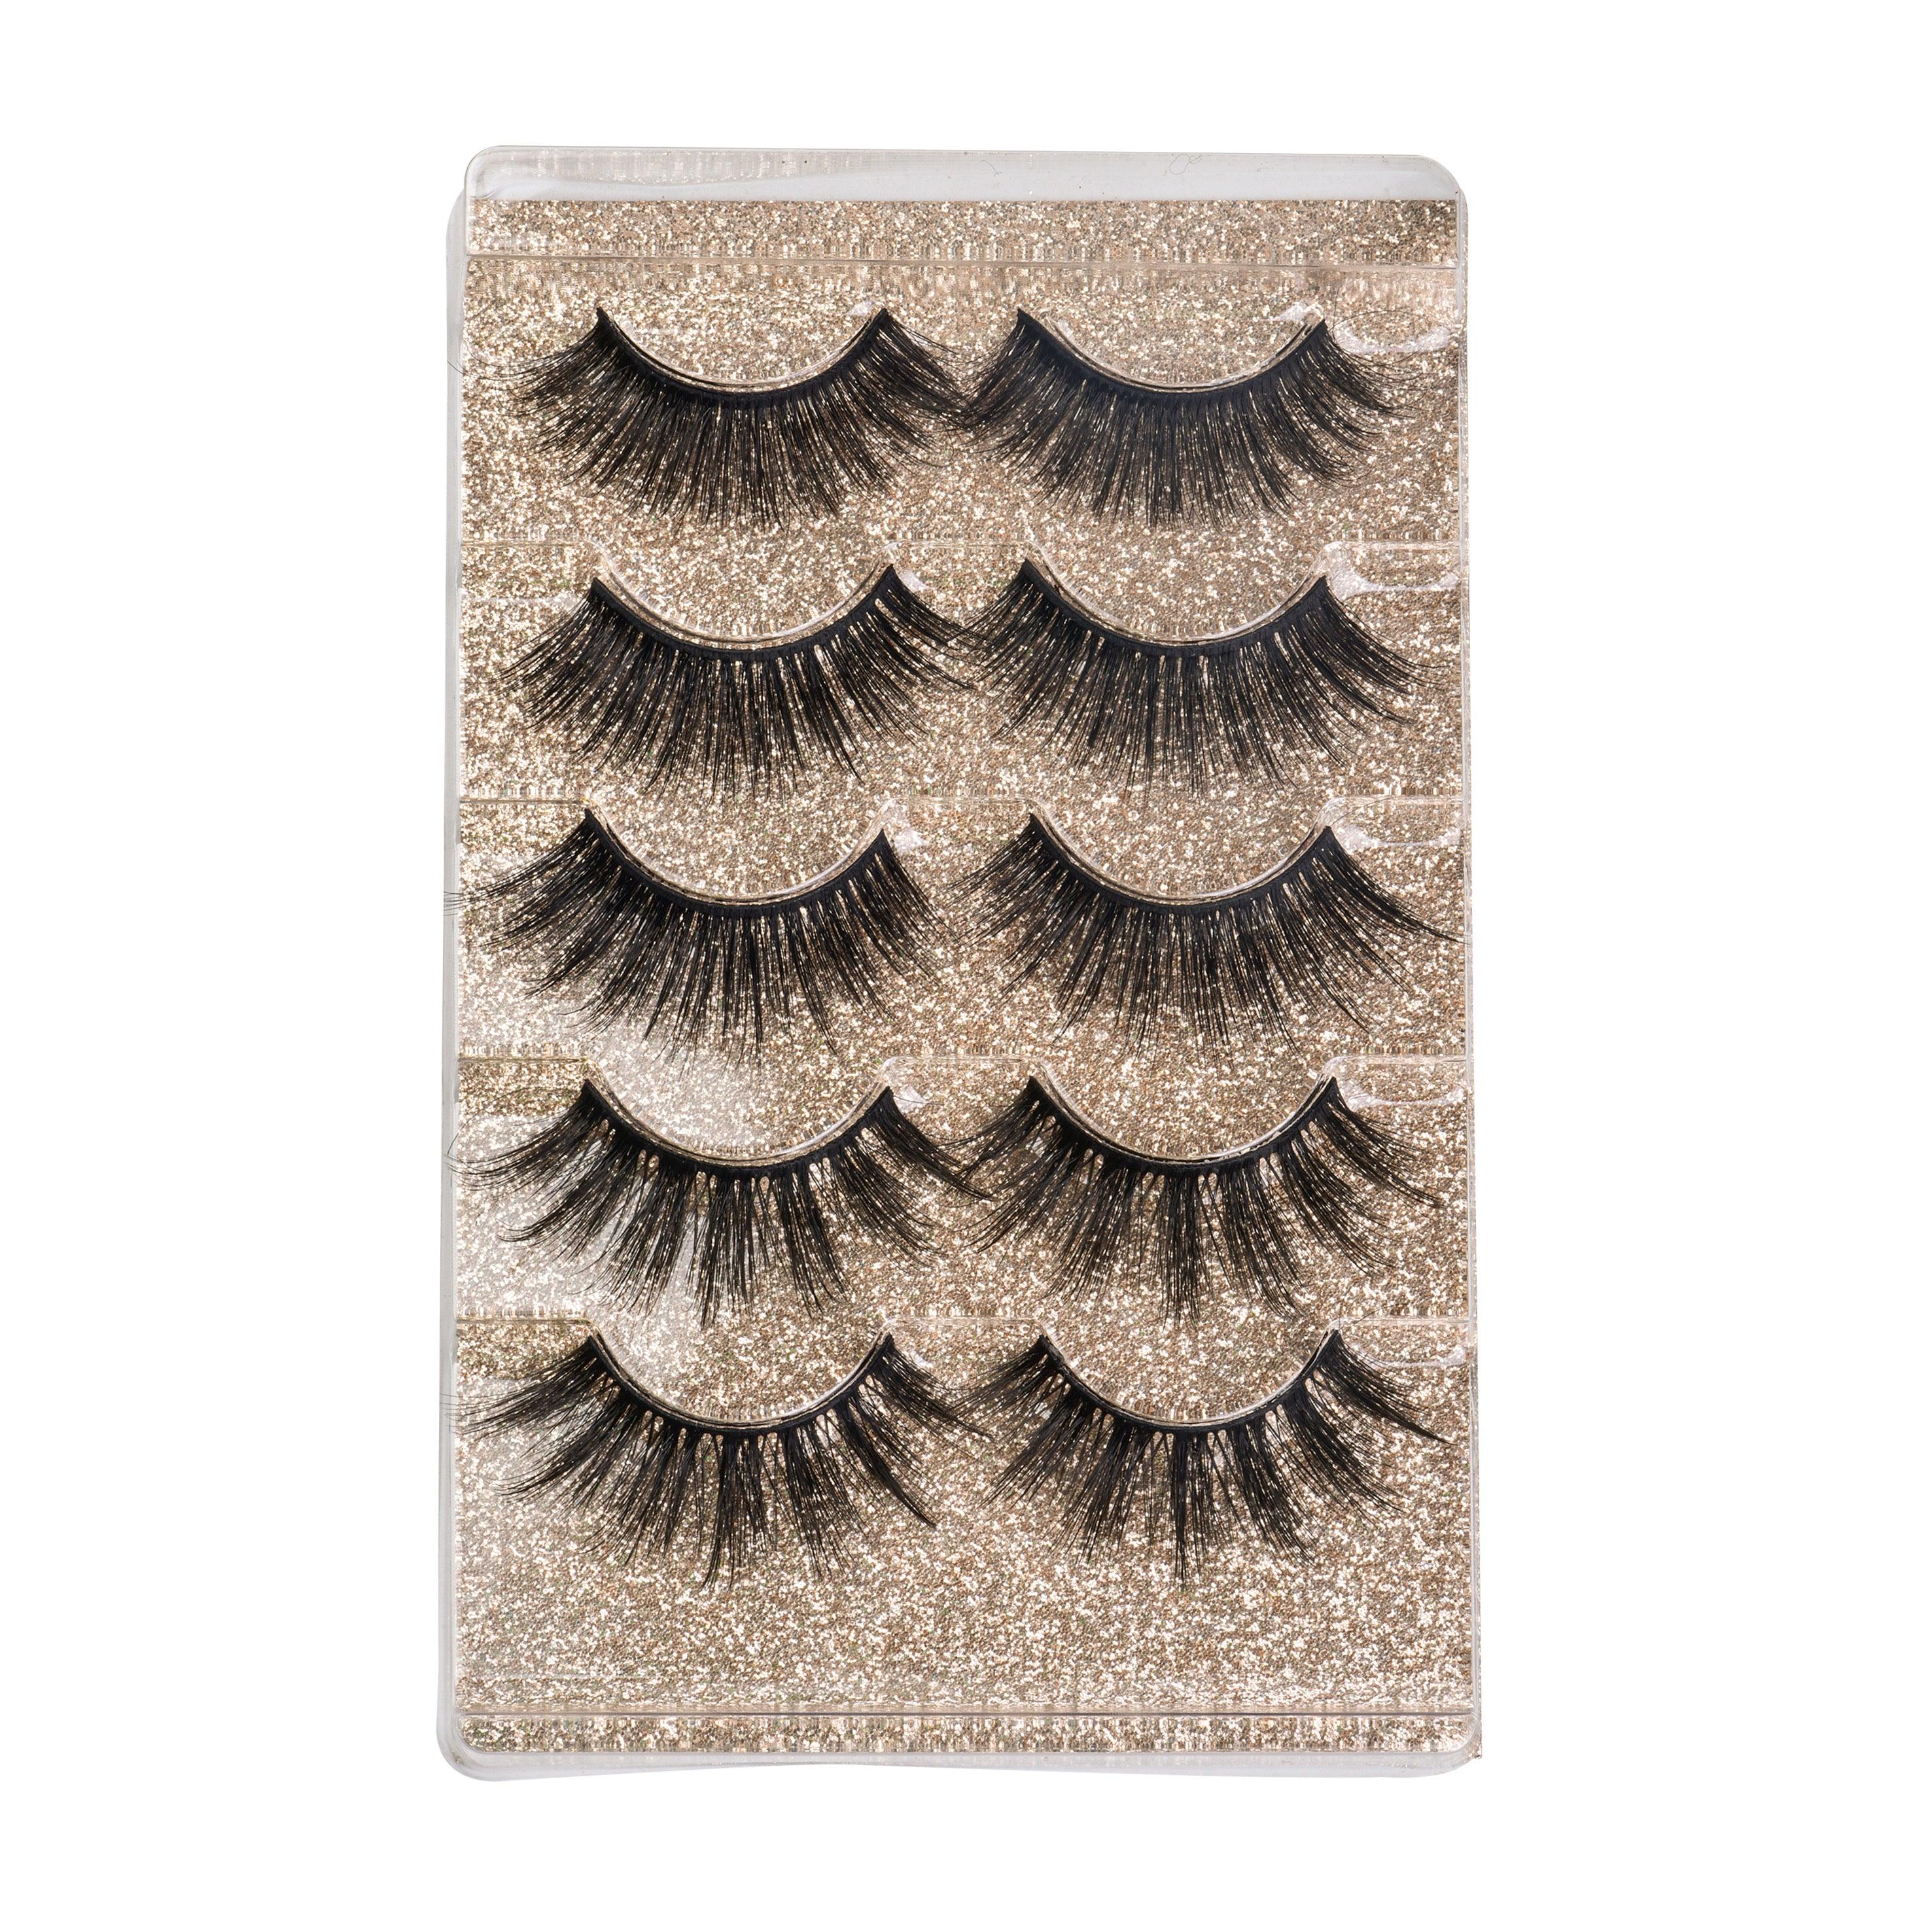 5 Pairs Majestic Lashes #5 (Pack of 6) - Miss Lil USA Wholesale